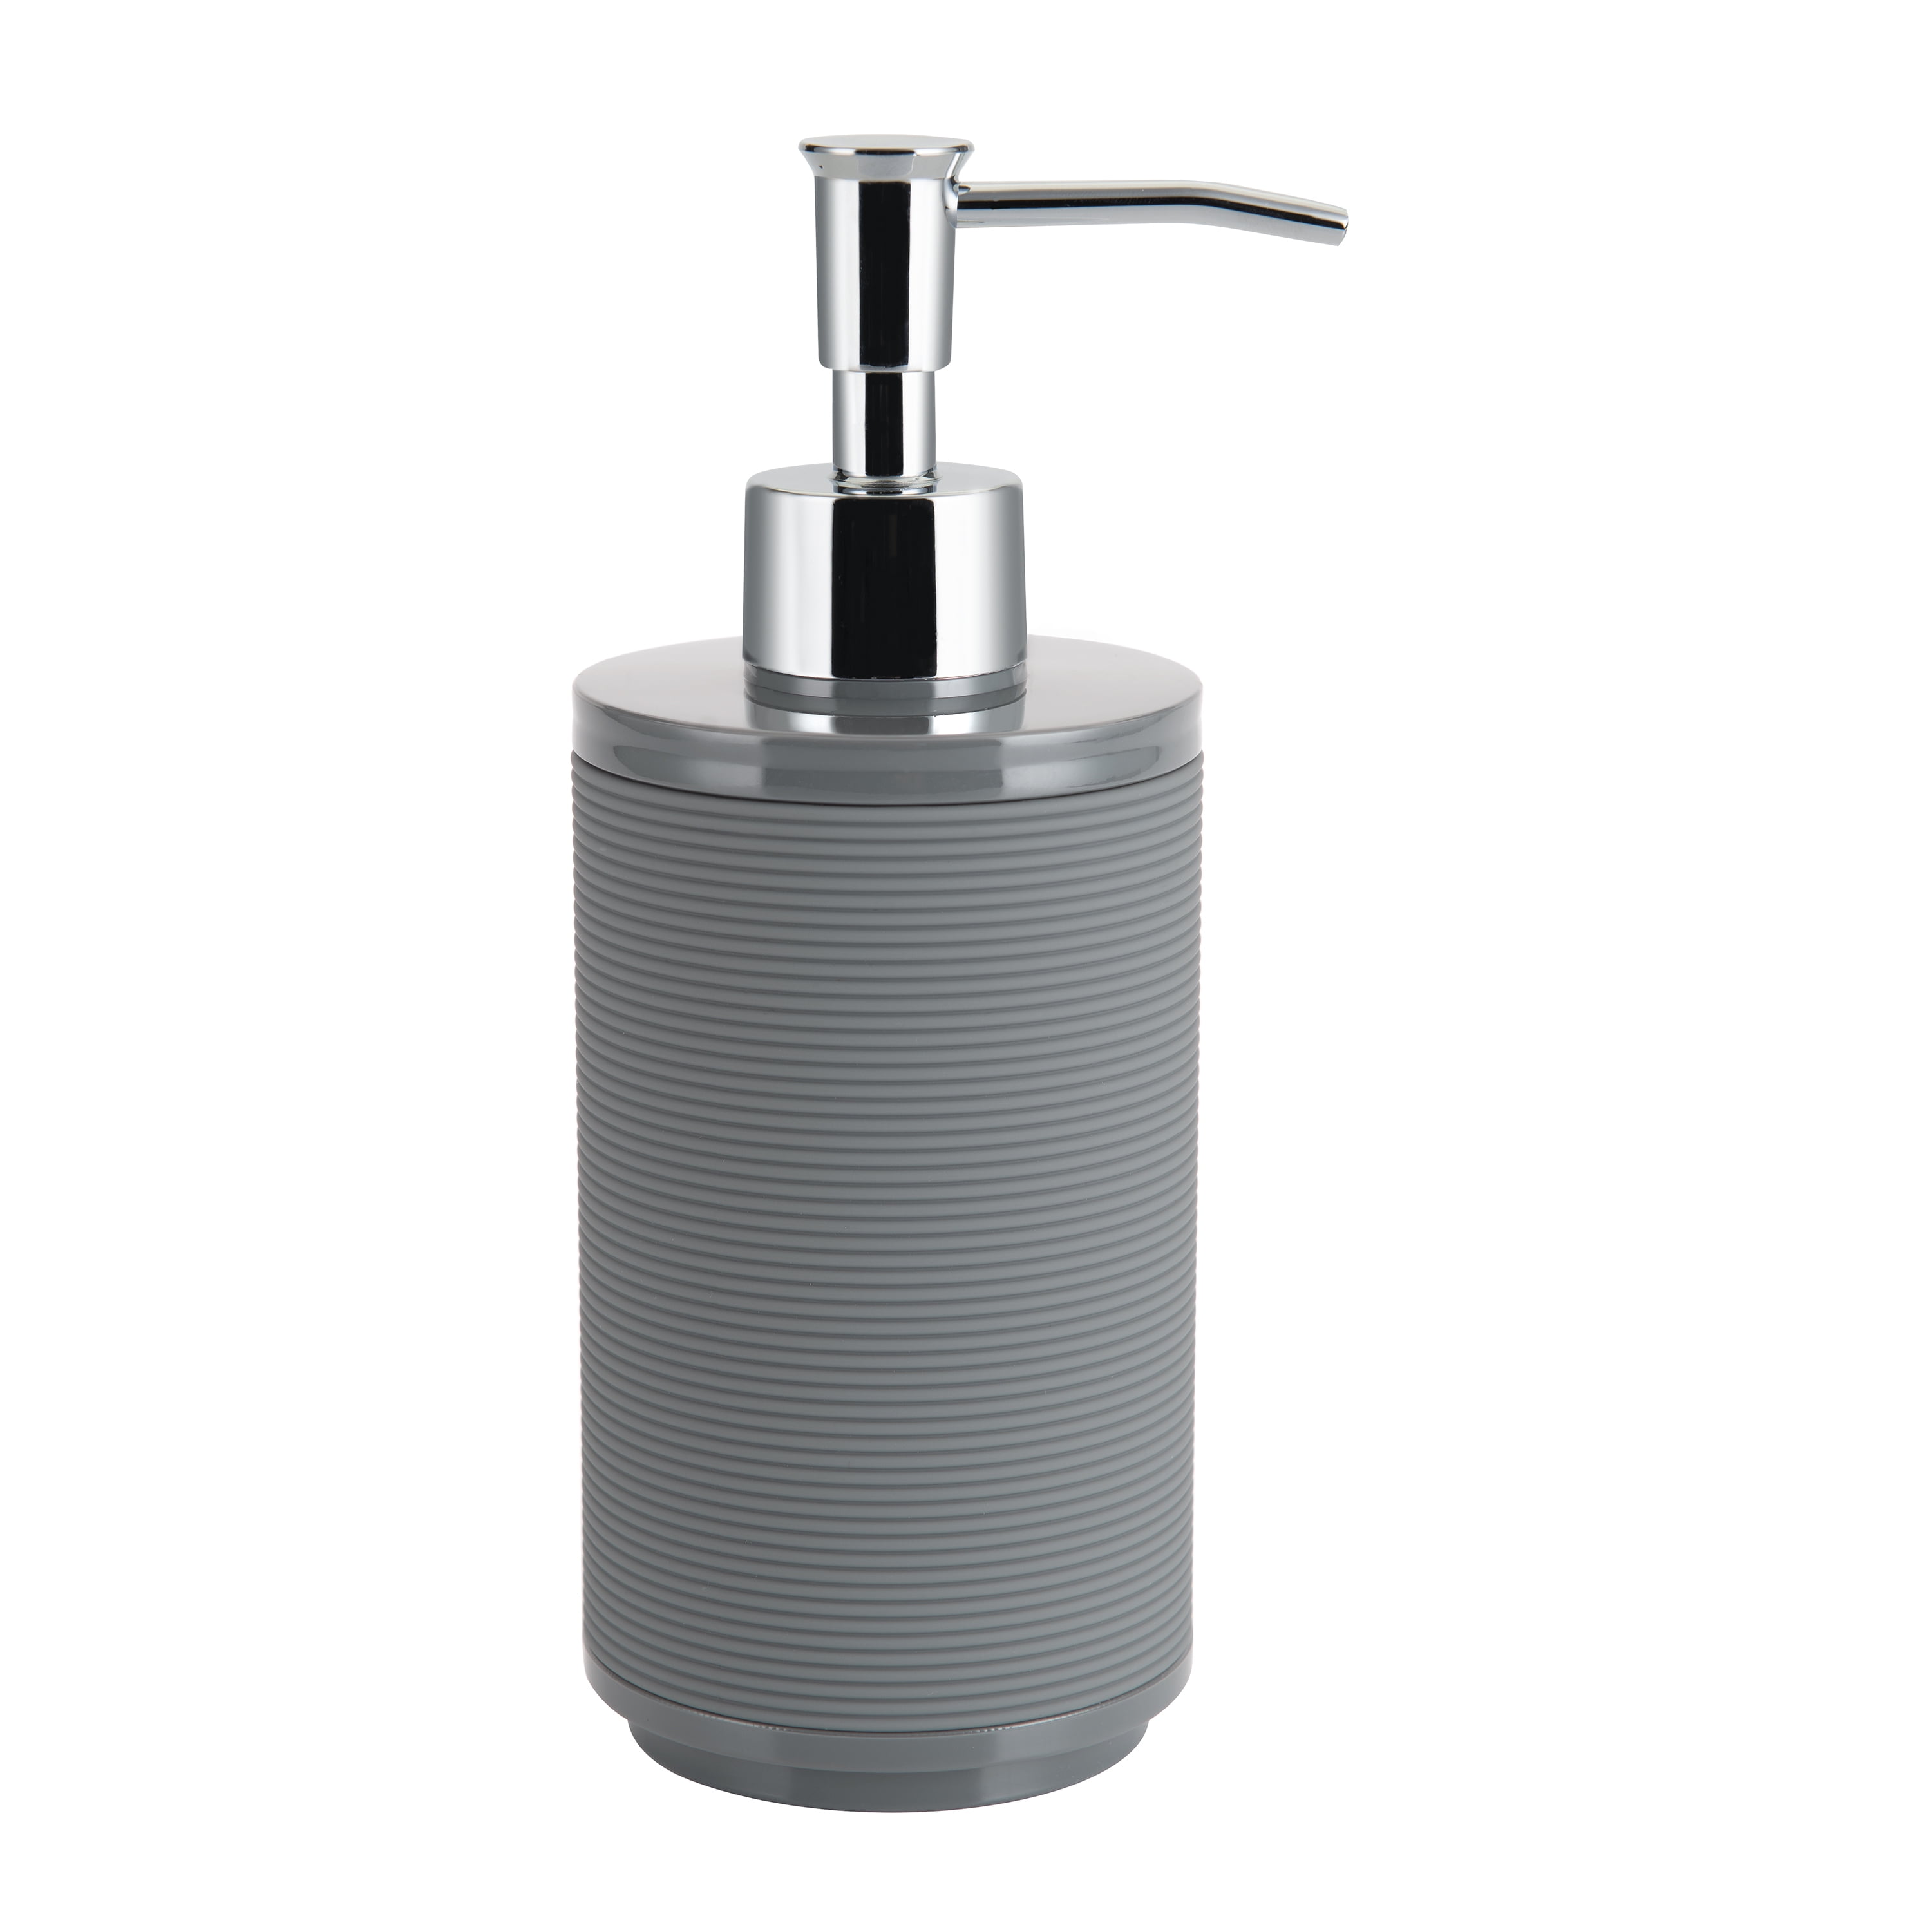 Moen 116732 Replacement Soap Dispenser From The Aberdeen Collection Chrome for sale online